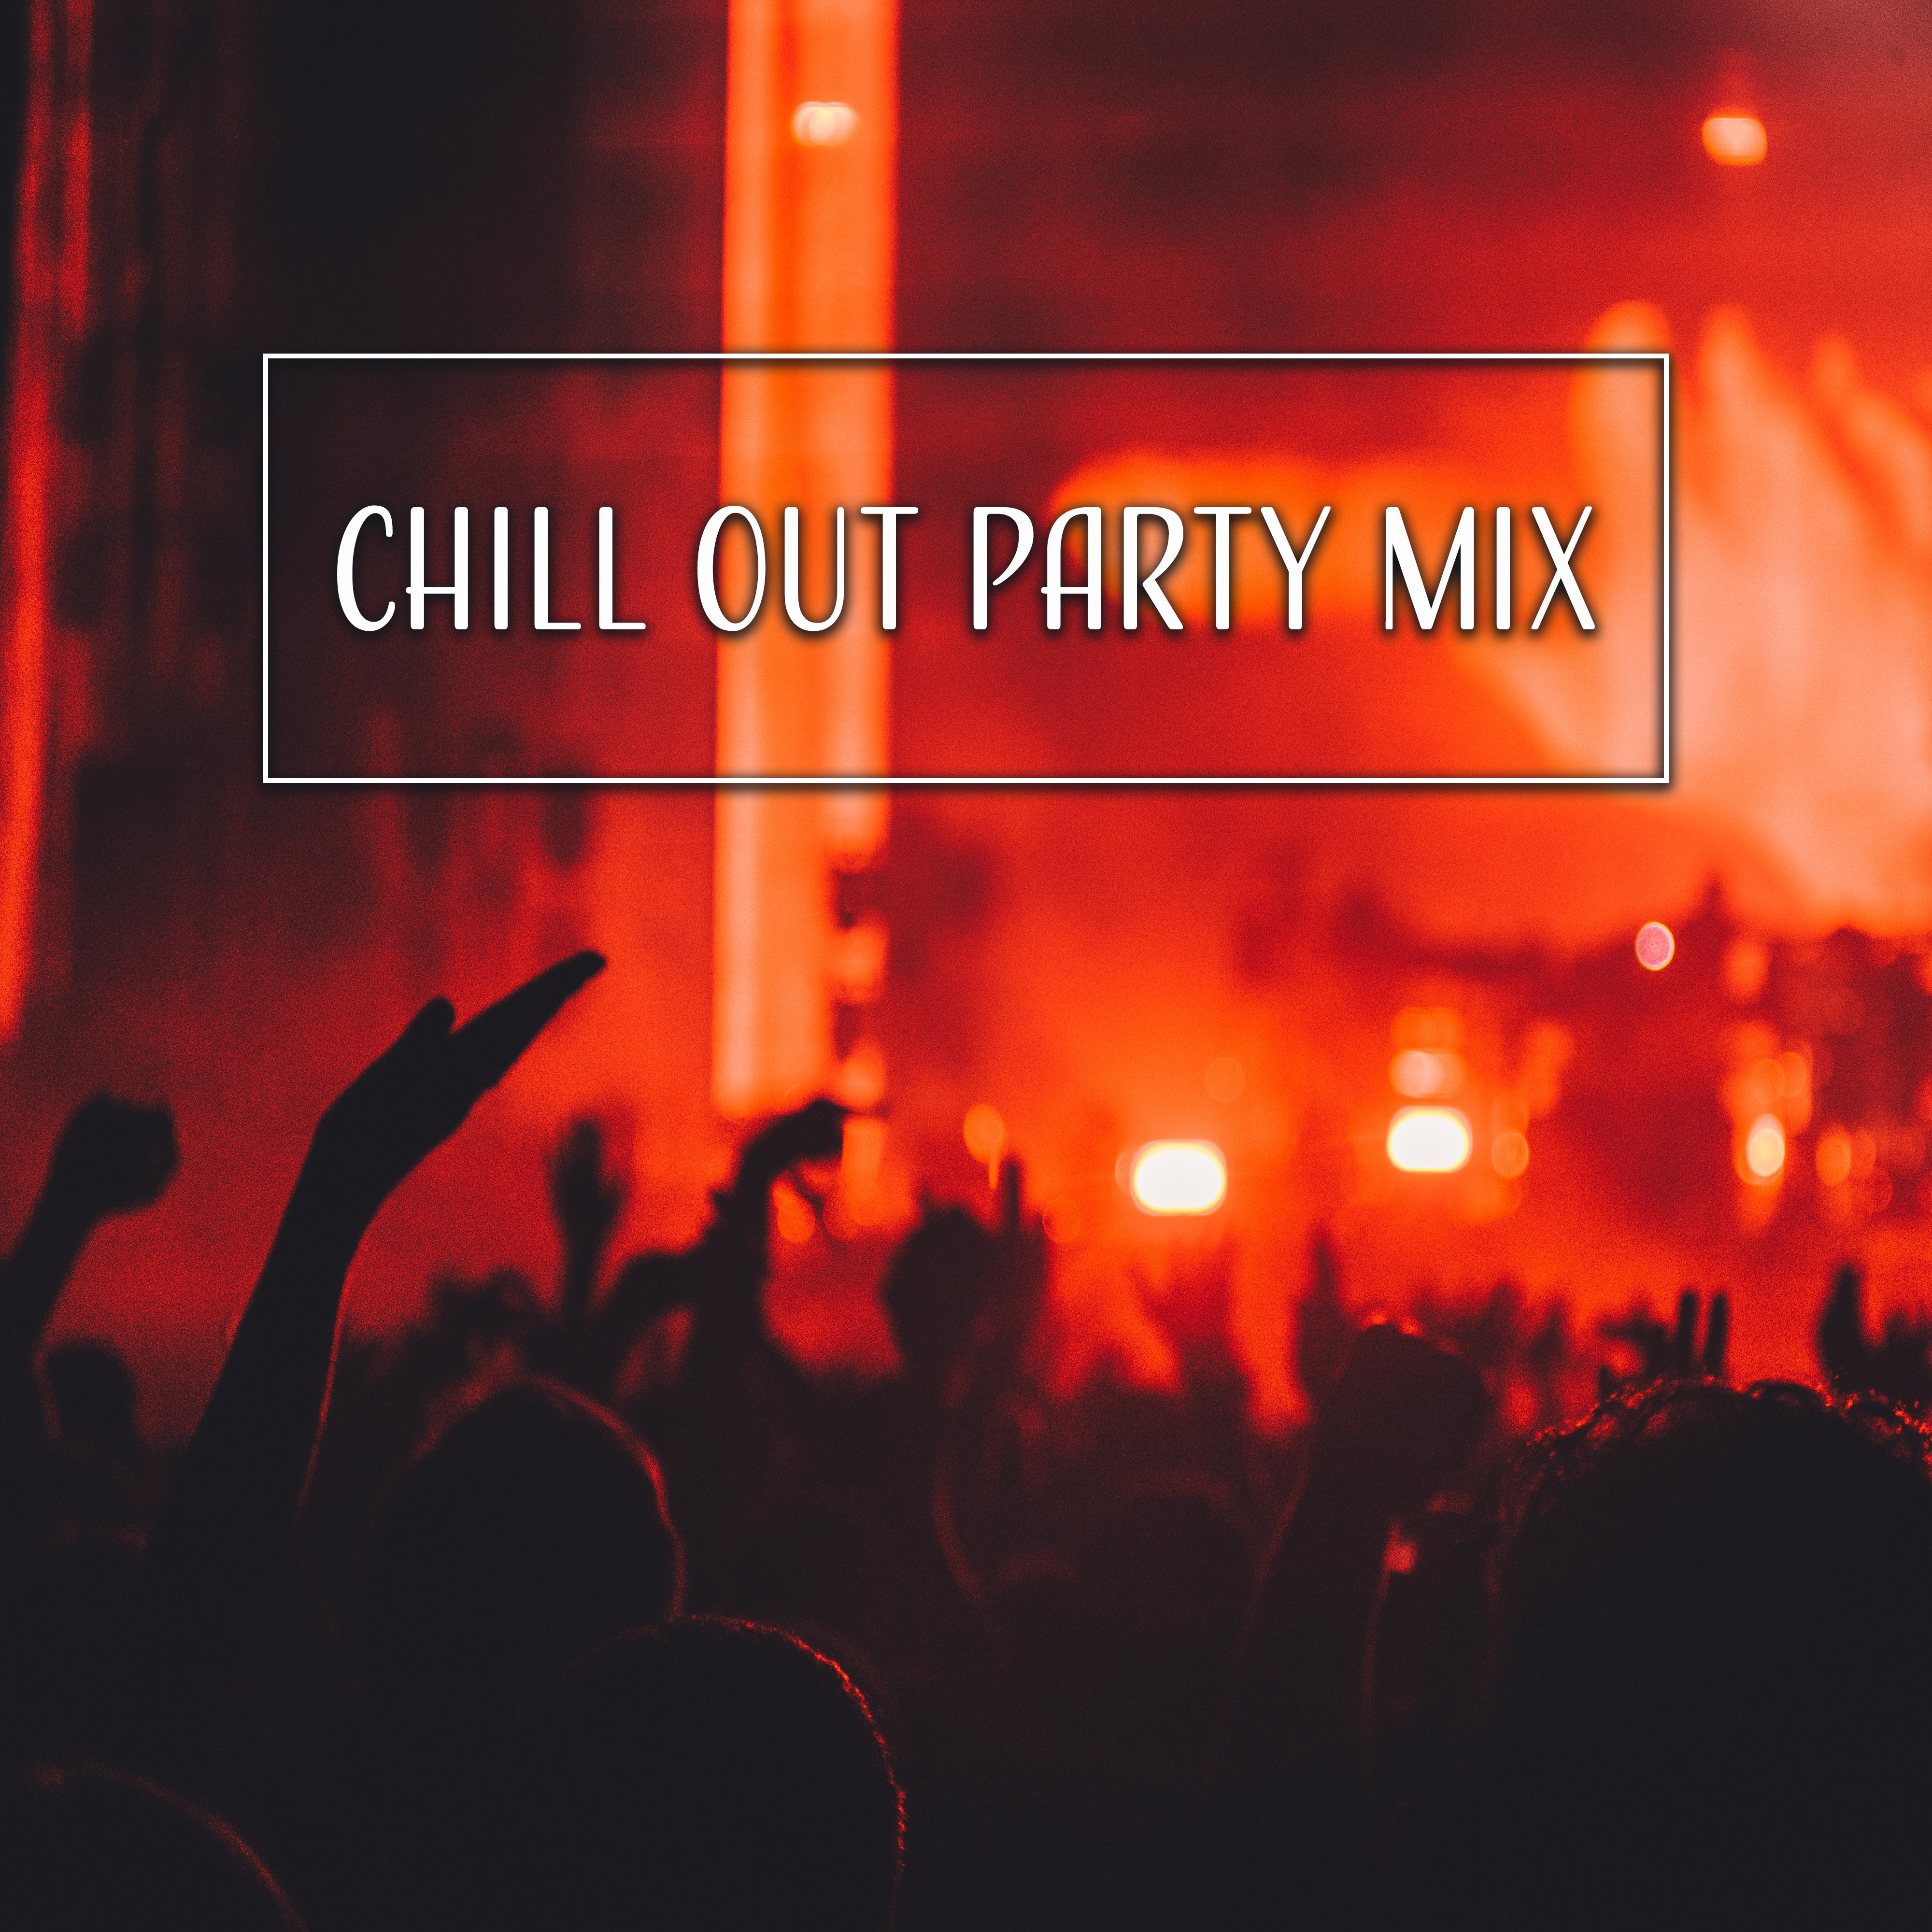 Chill Out Party Mix – New Chillout Beats, Chill Out Music, Relax, Party, Beach House, Lounge